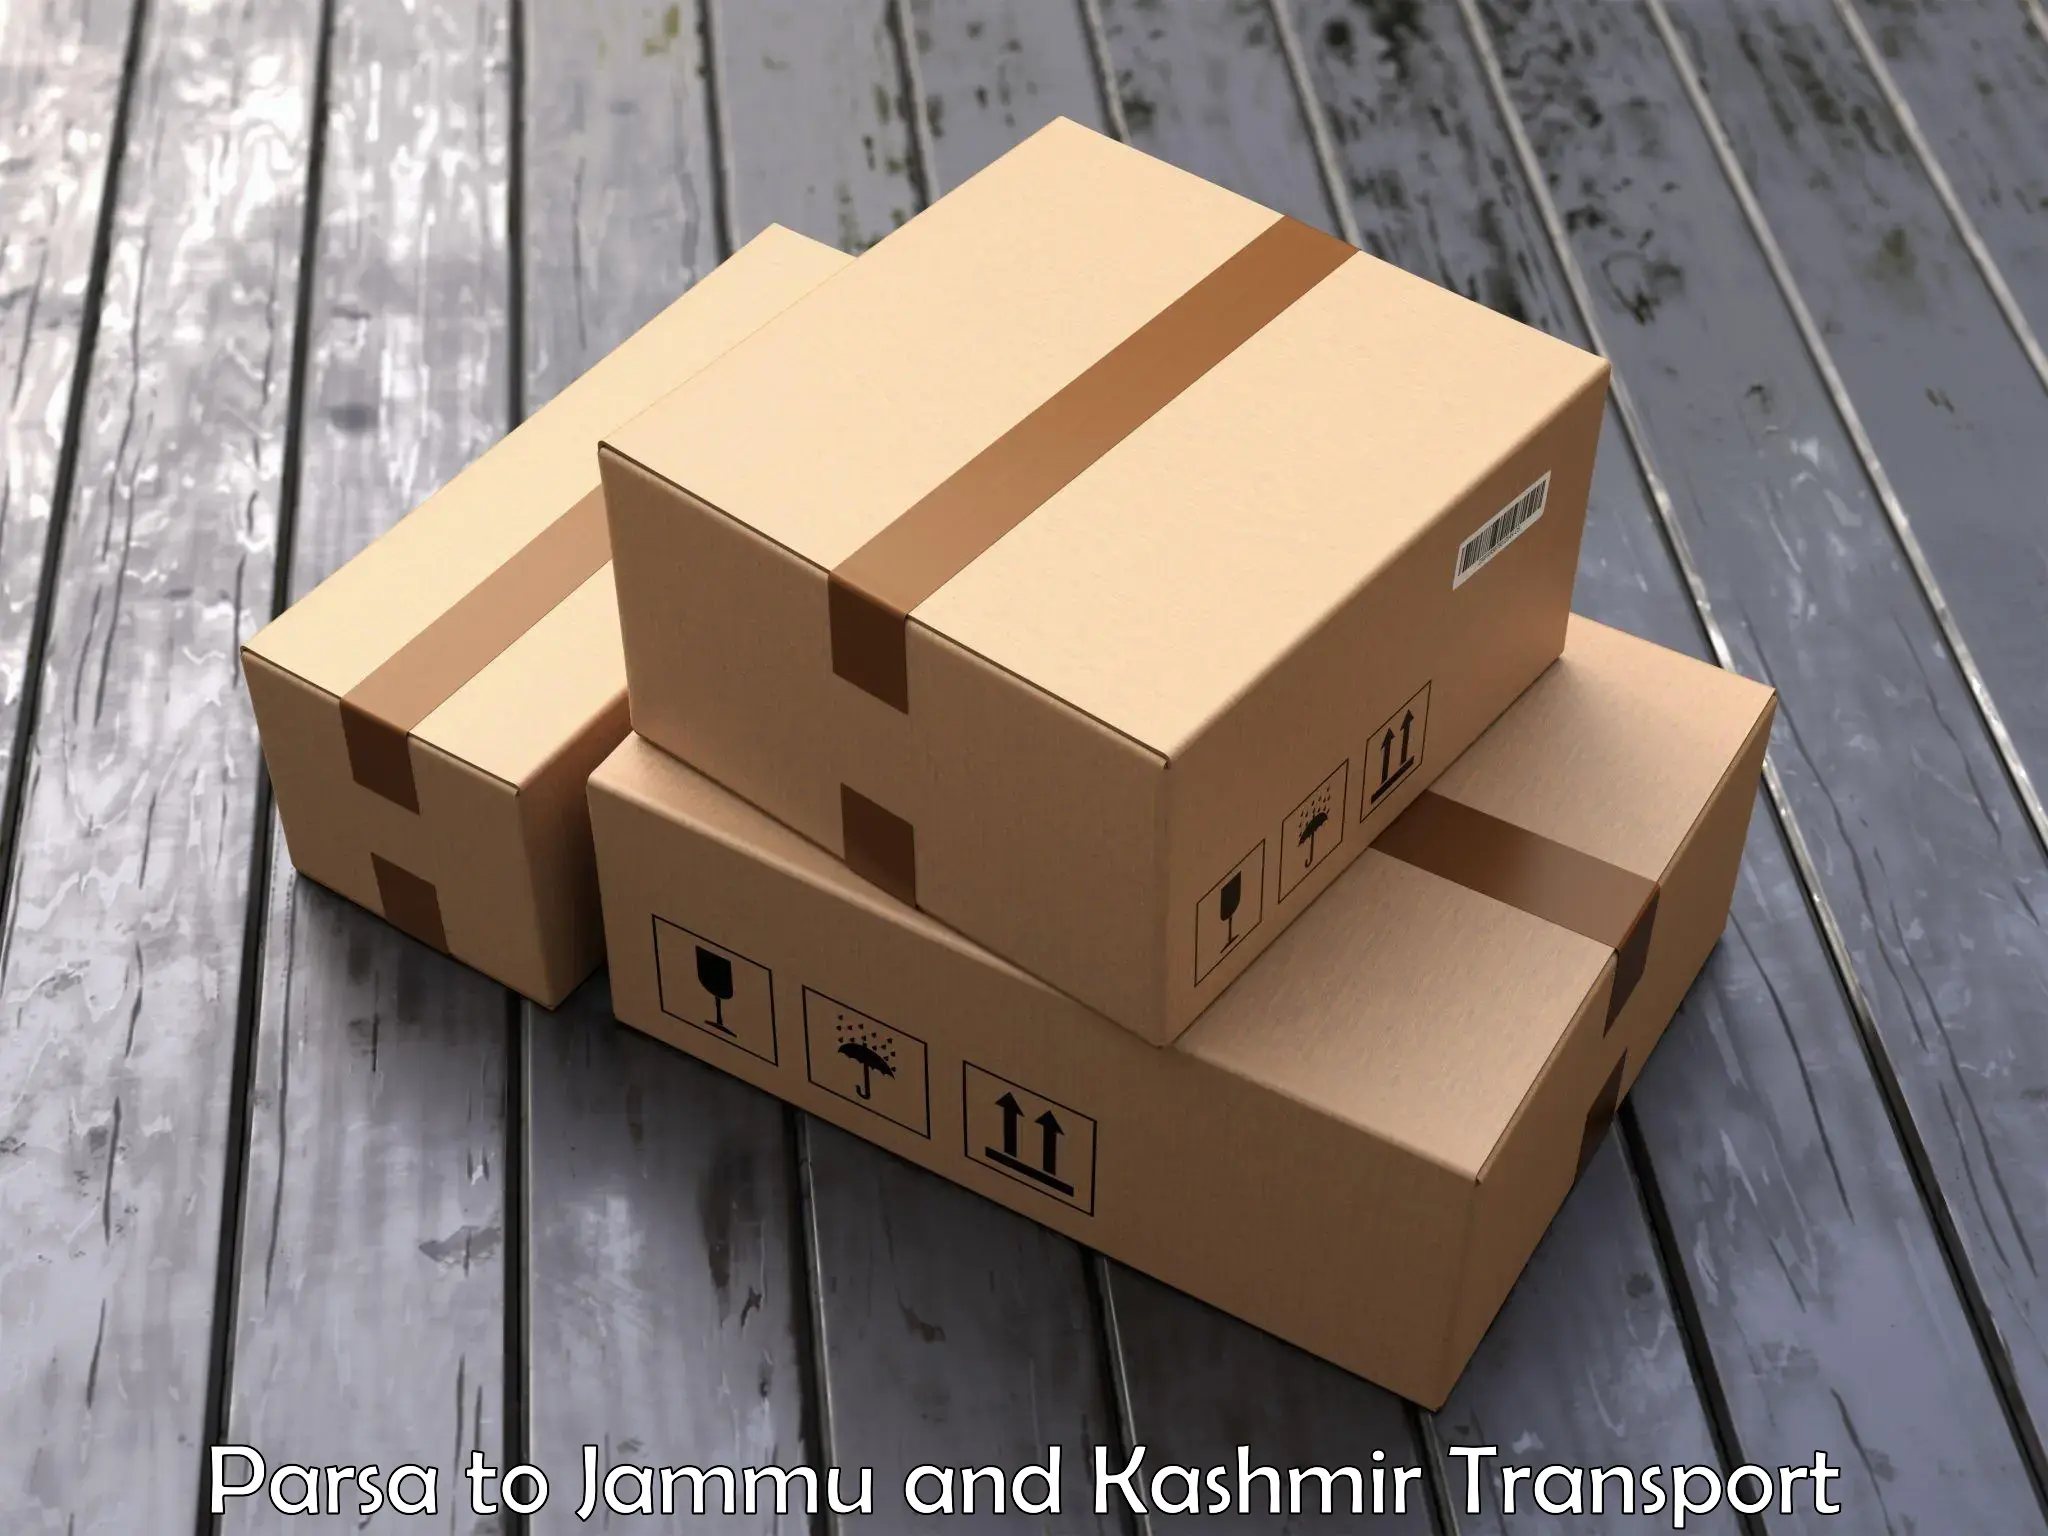 Air freight transport services Parsa to Jammu and Kashmir